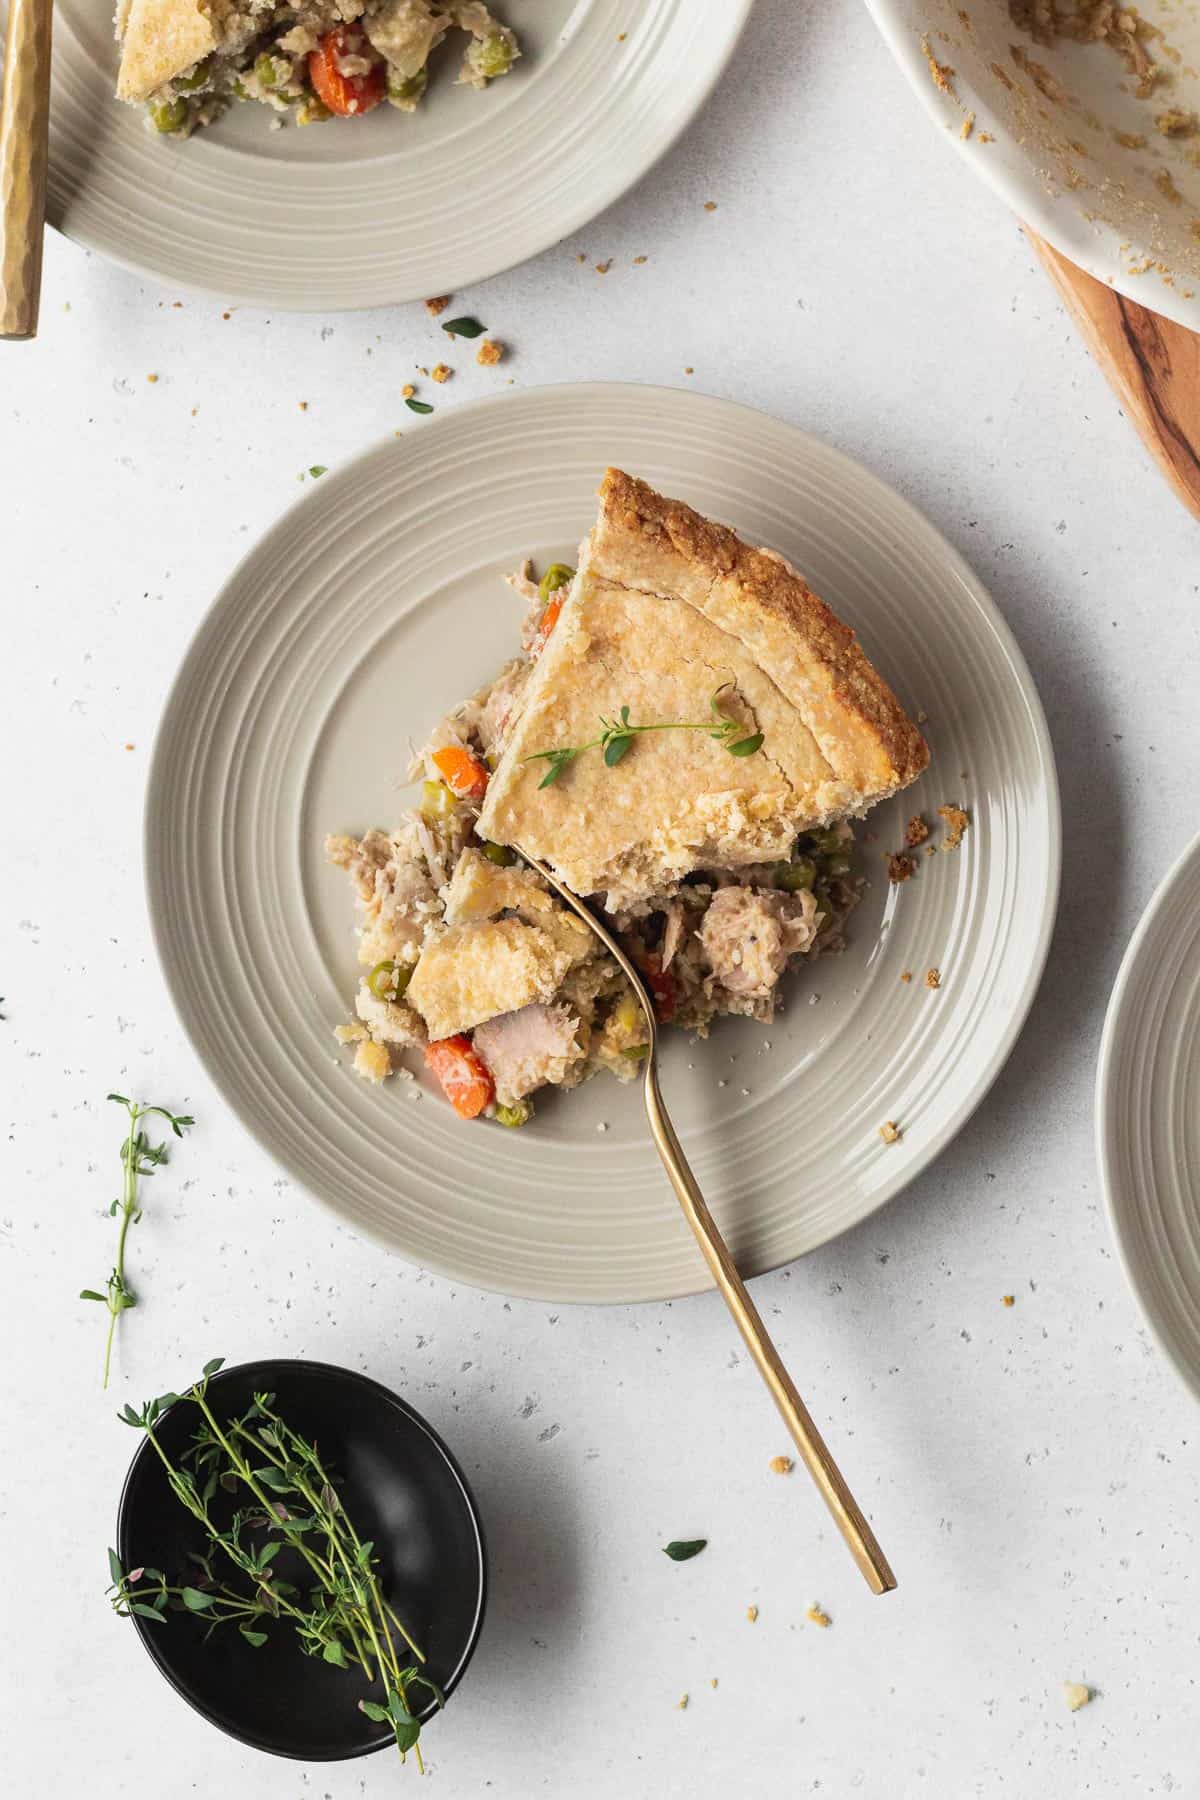 A slice of vegan chicken pot pie on a plate with a gold fork cutting through it.